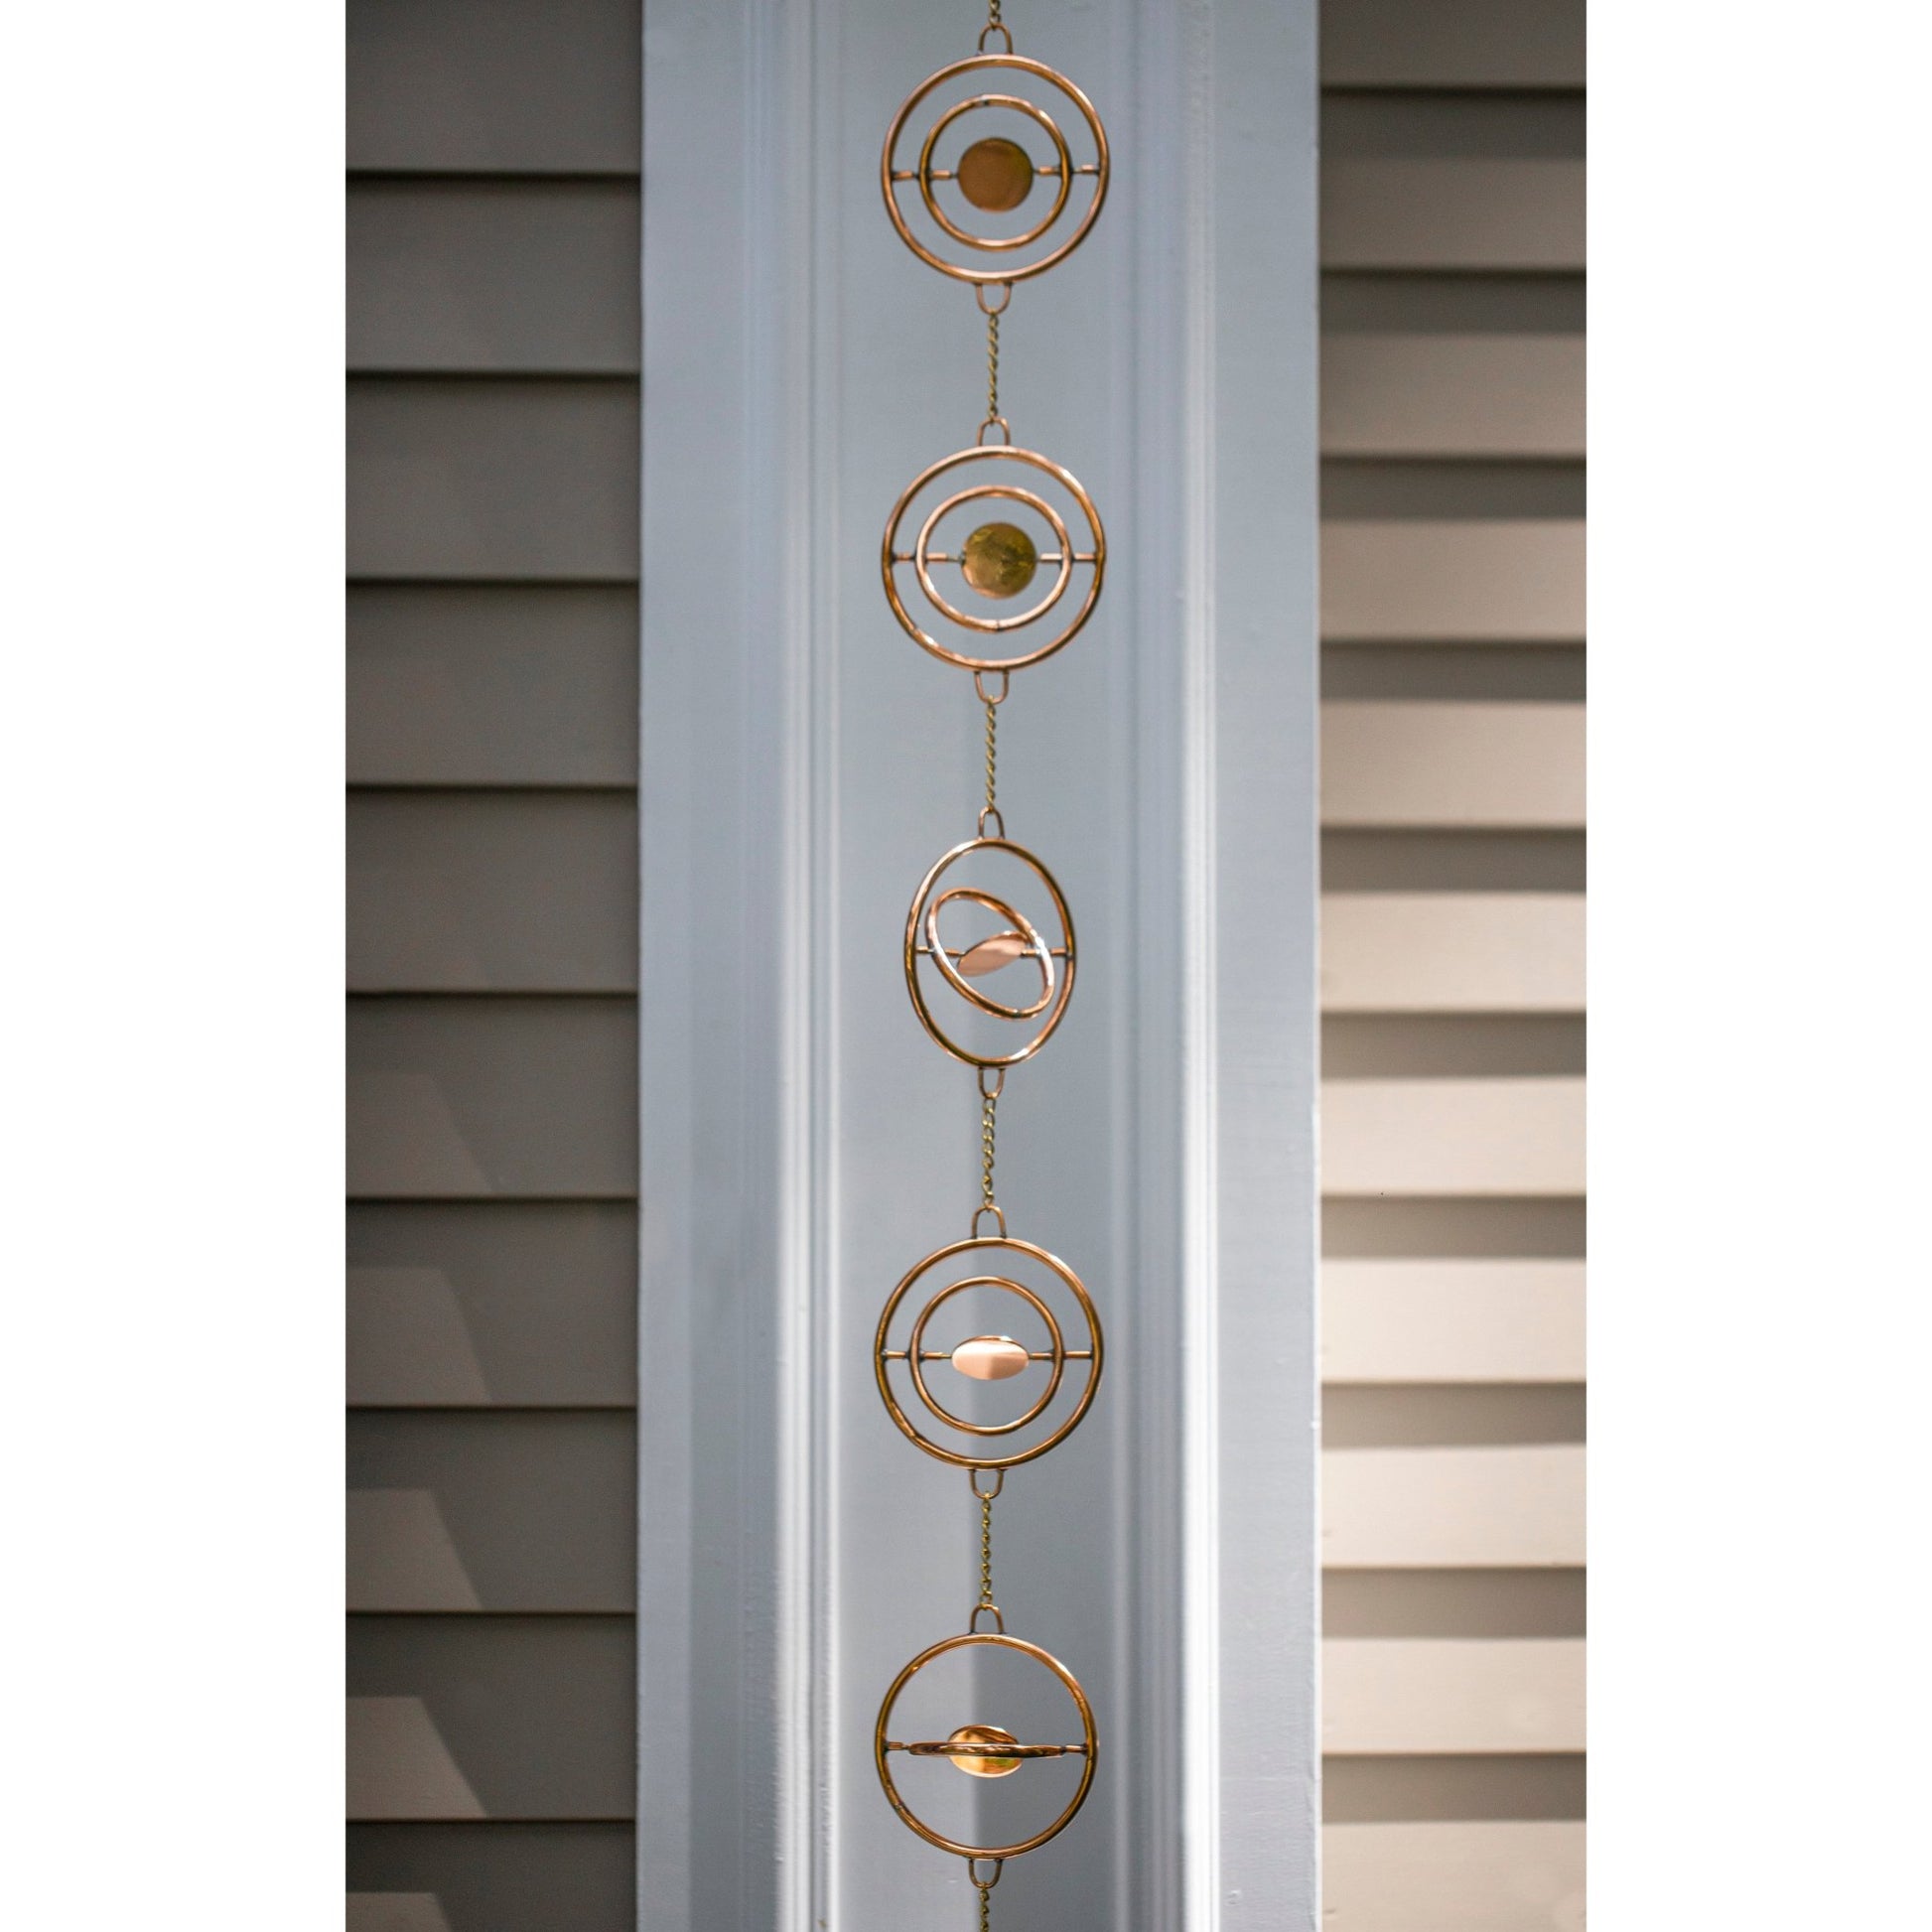 Stellar Rain Chain - 8.5 ft., with 13 Large Figures - Good Directions